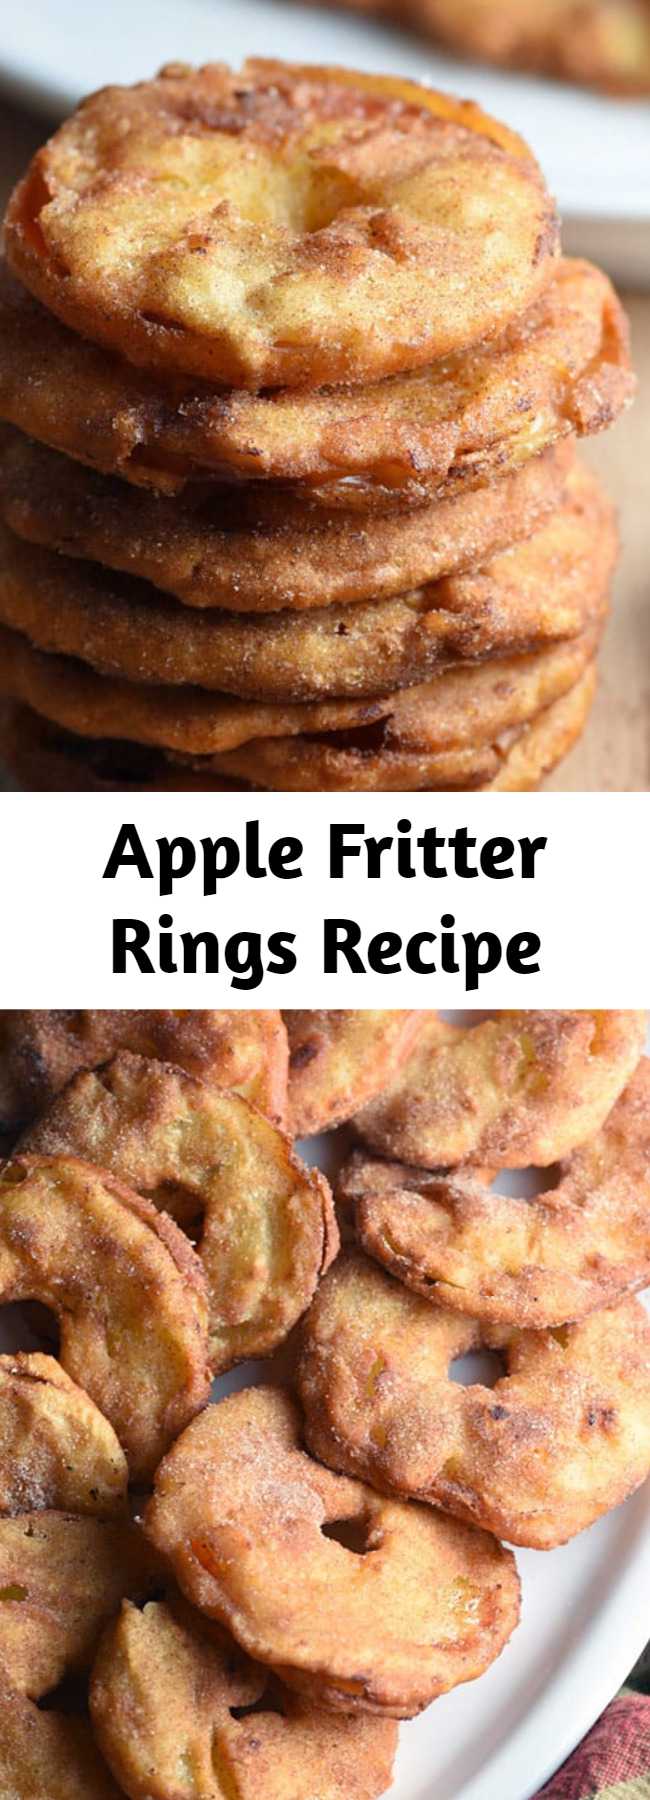 Apple Fritter Rings Recipe - These Apple Fritter Rings are a fun spin on the popular donut shop Apple Fritter. Like a sweet apple version of an onion ring! #applefritters #applefritterrings #applefritterringsrecipe #appleringsfried